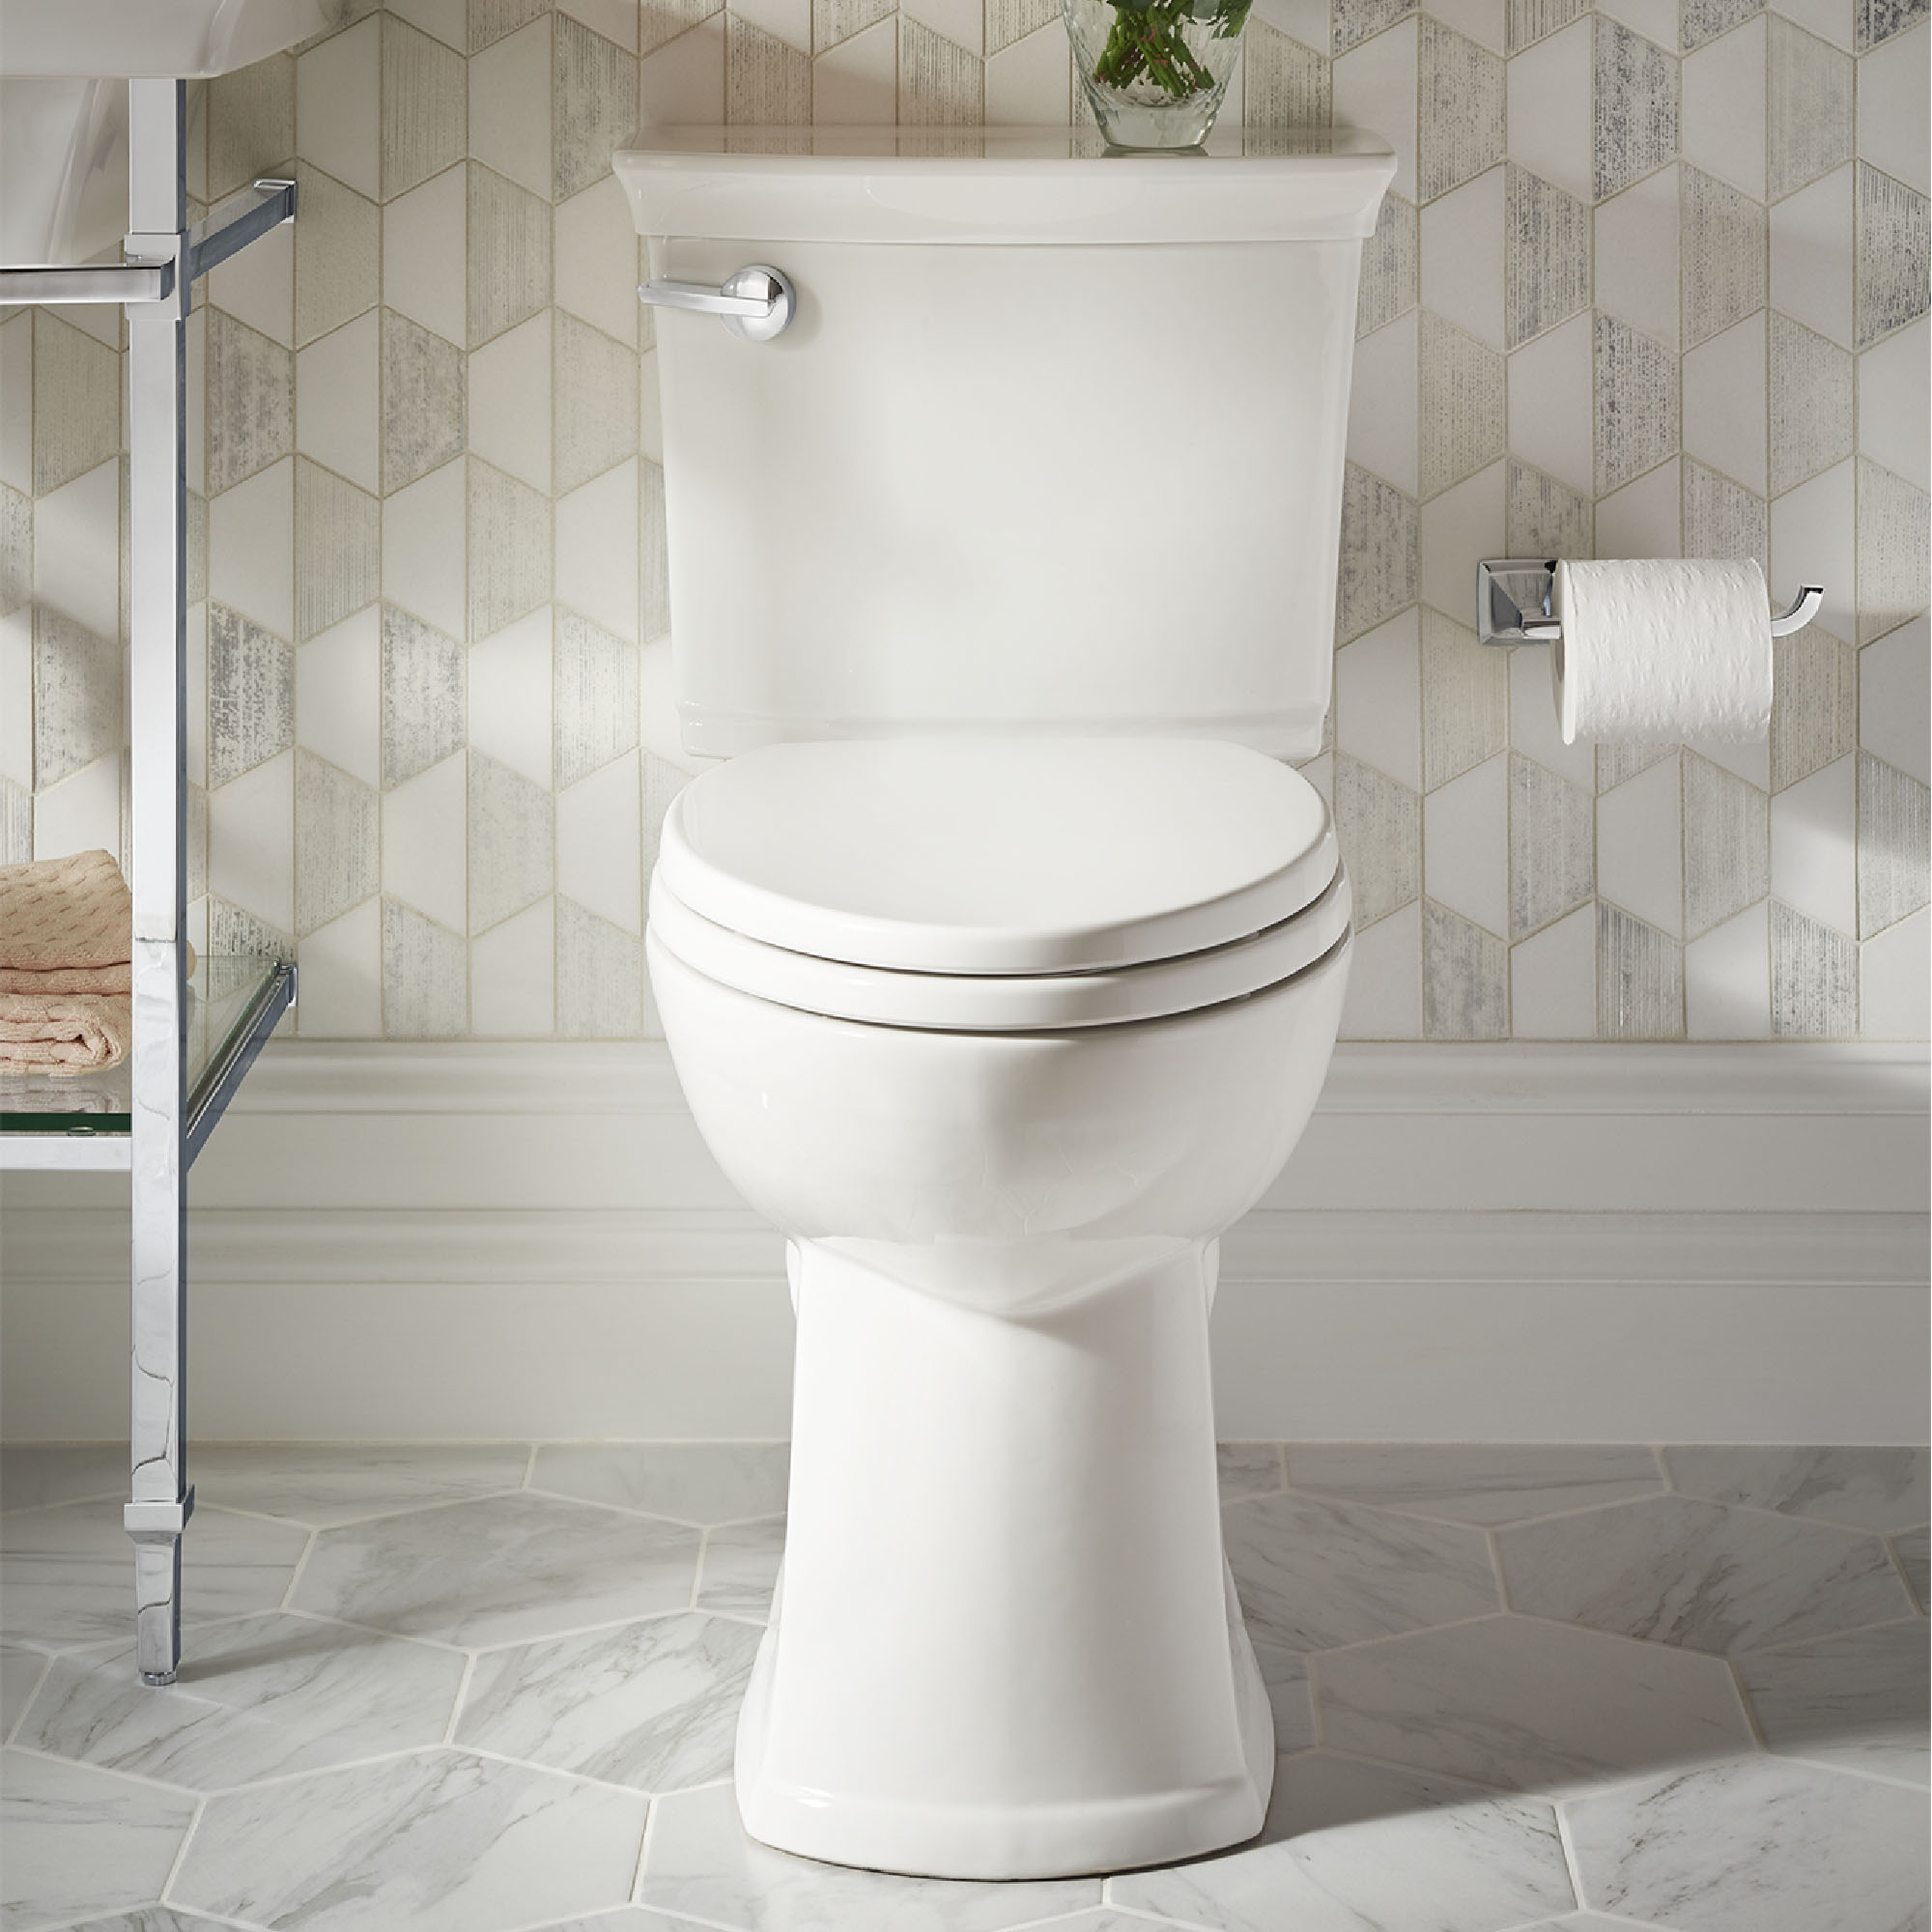 Wyatt® Two-Piece Chair Height Elongated Toilet with Seat